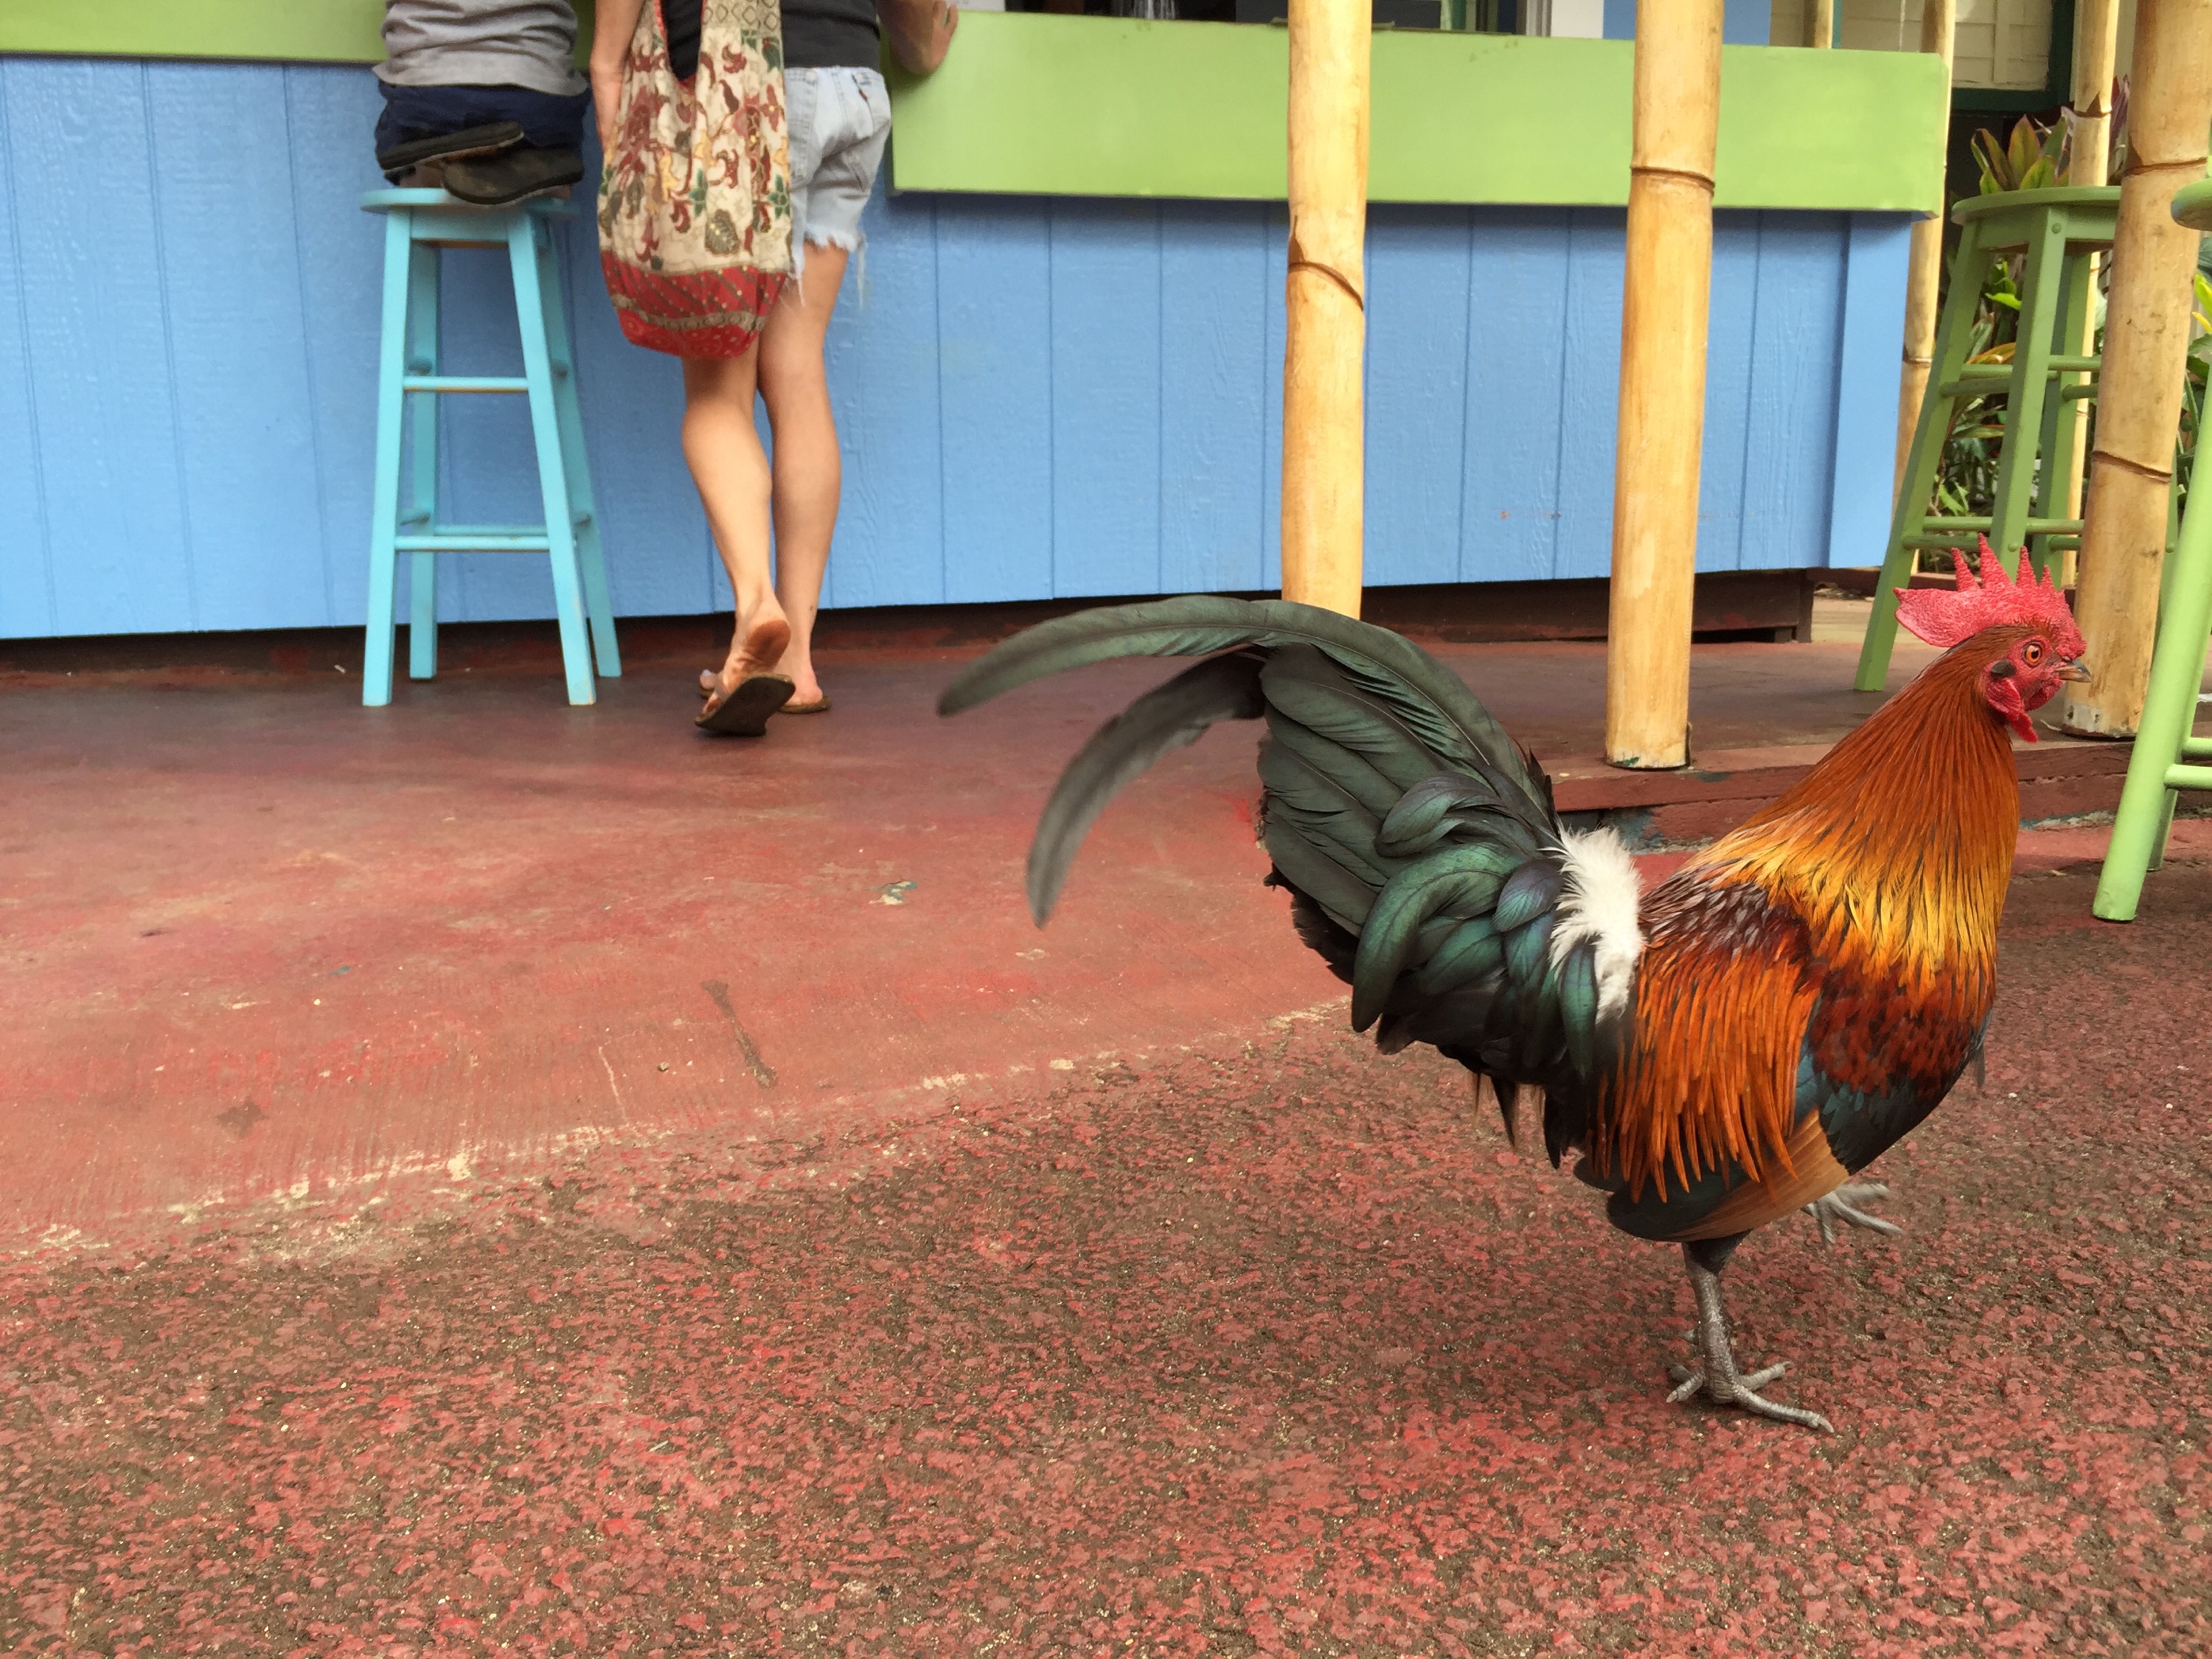 A low angle shot of a pretty rooster. A woman's legs can be seen in the background.